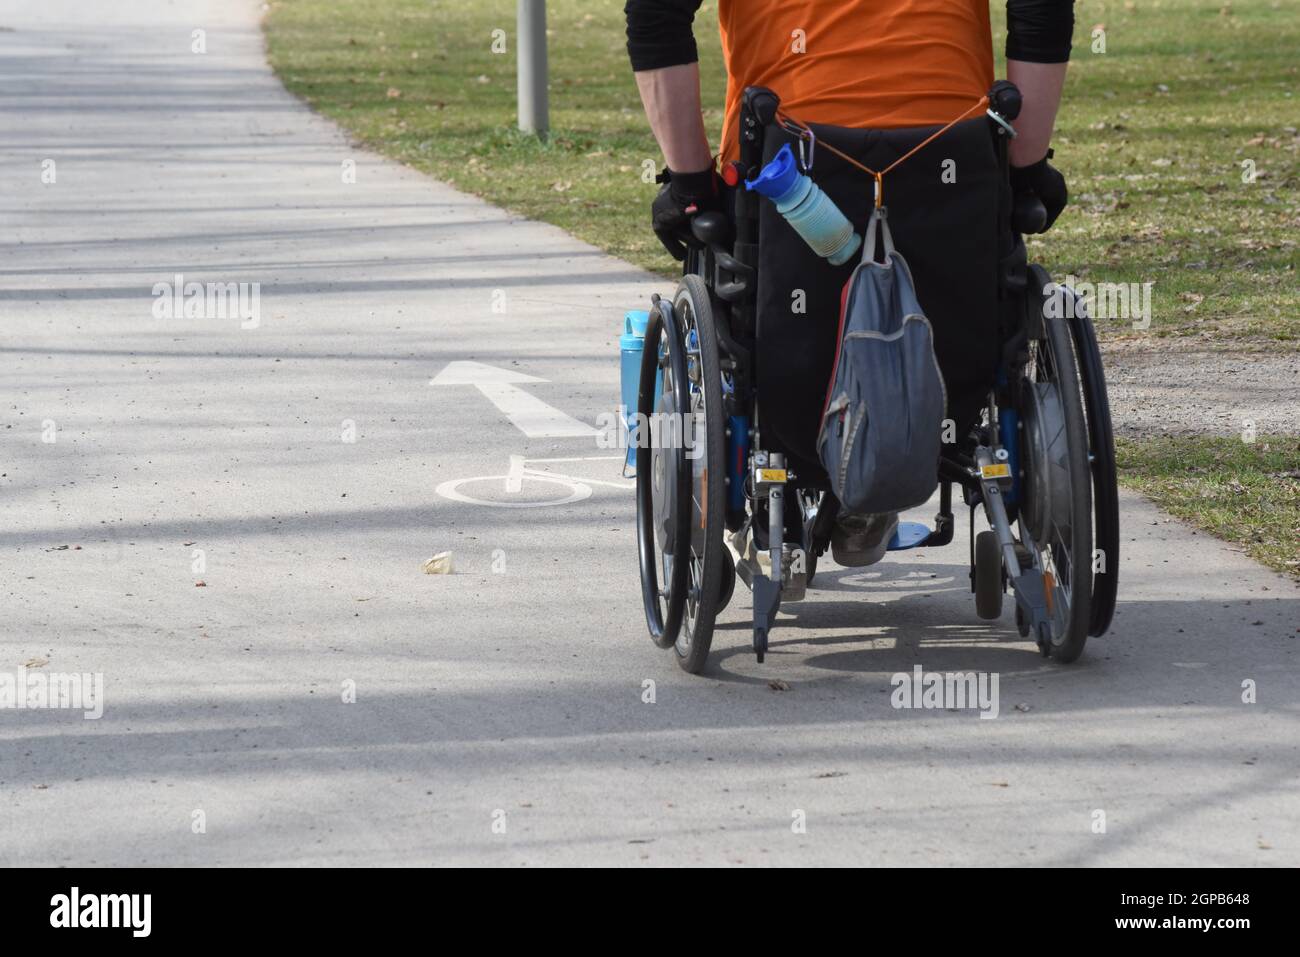 barrier free access and mobility in daily life for wheelchair users Stock Photo